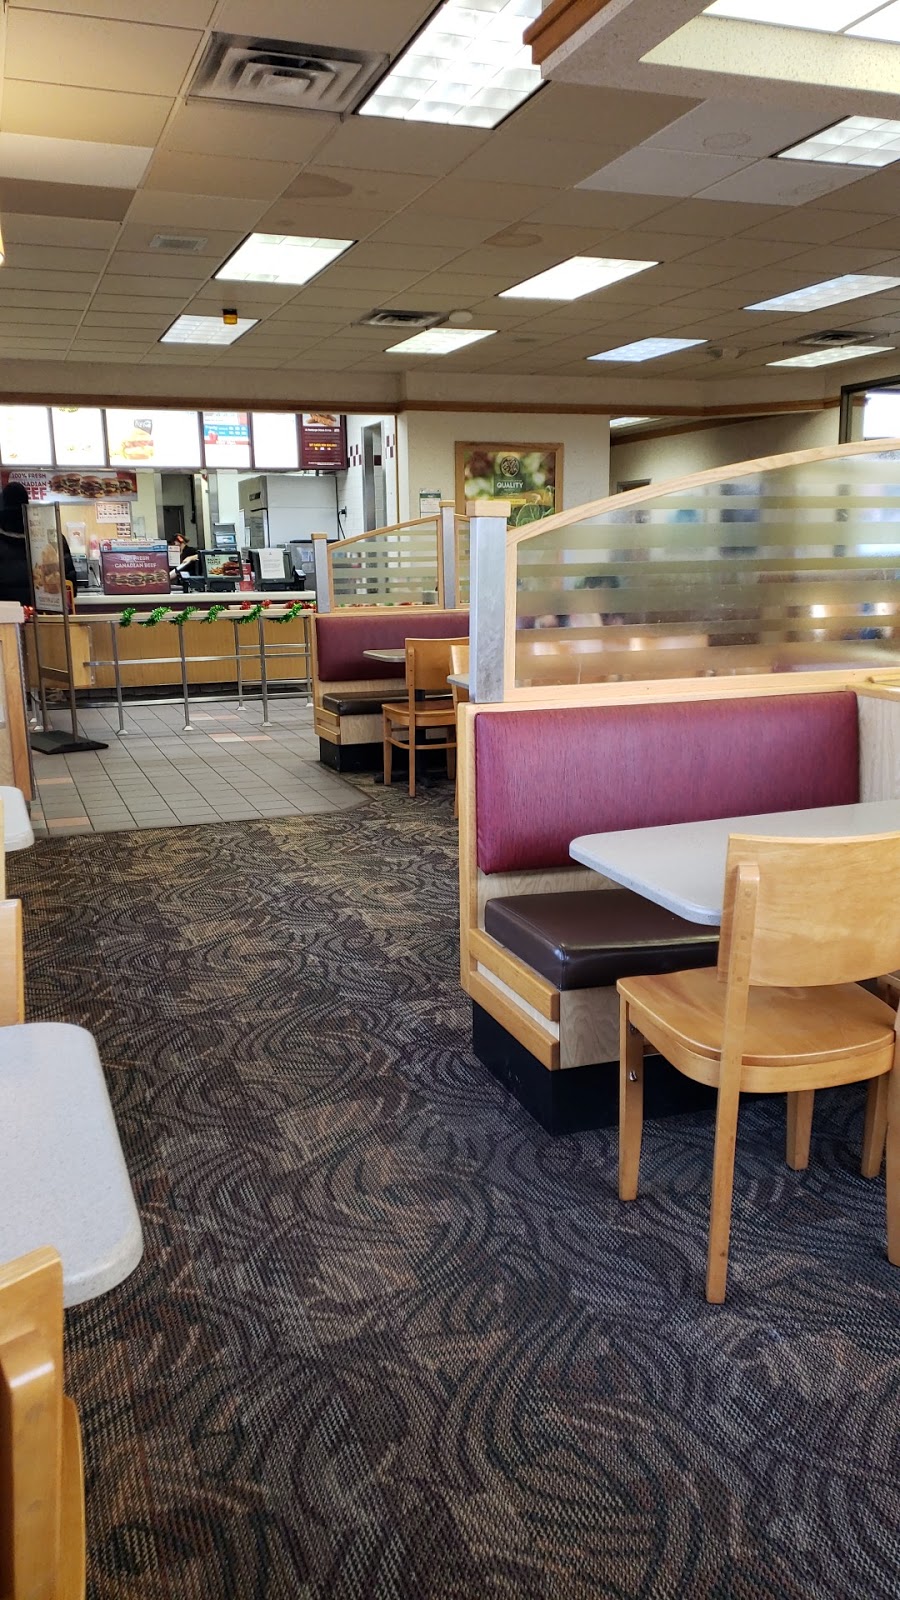 Wendys | 6449 Erin Mills Pkwy, Mississauga, ON L5N 4H4, Canada | Phone: (905) 819-6787